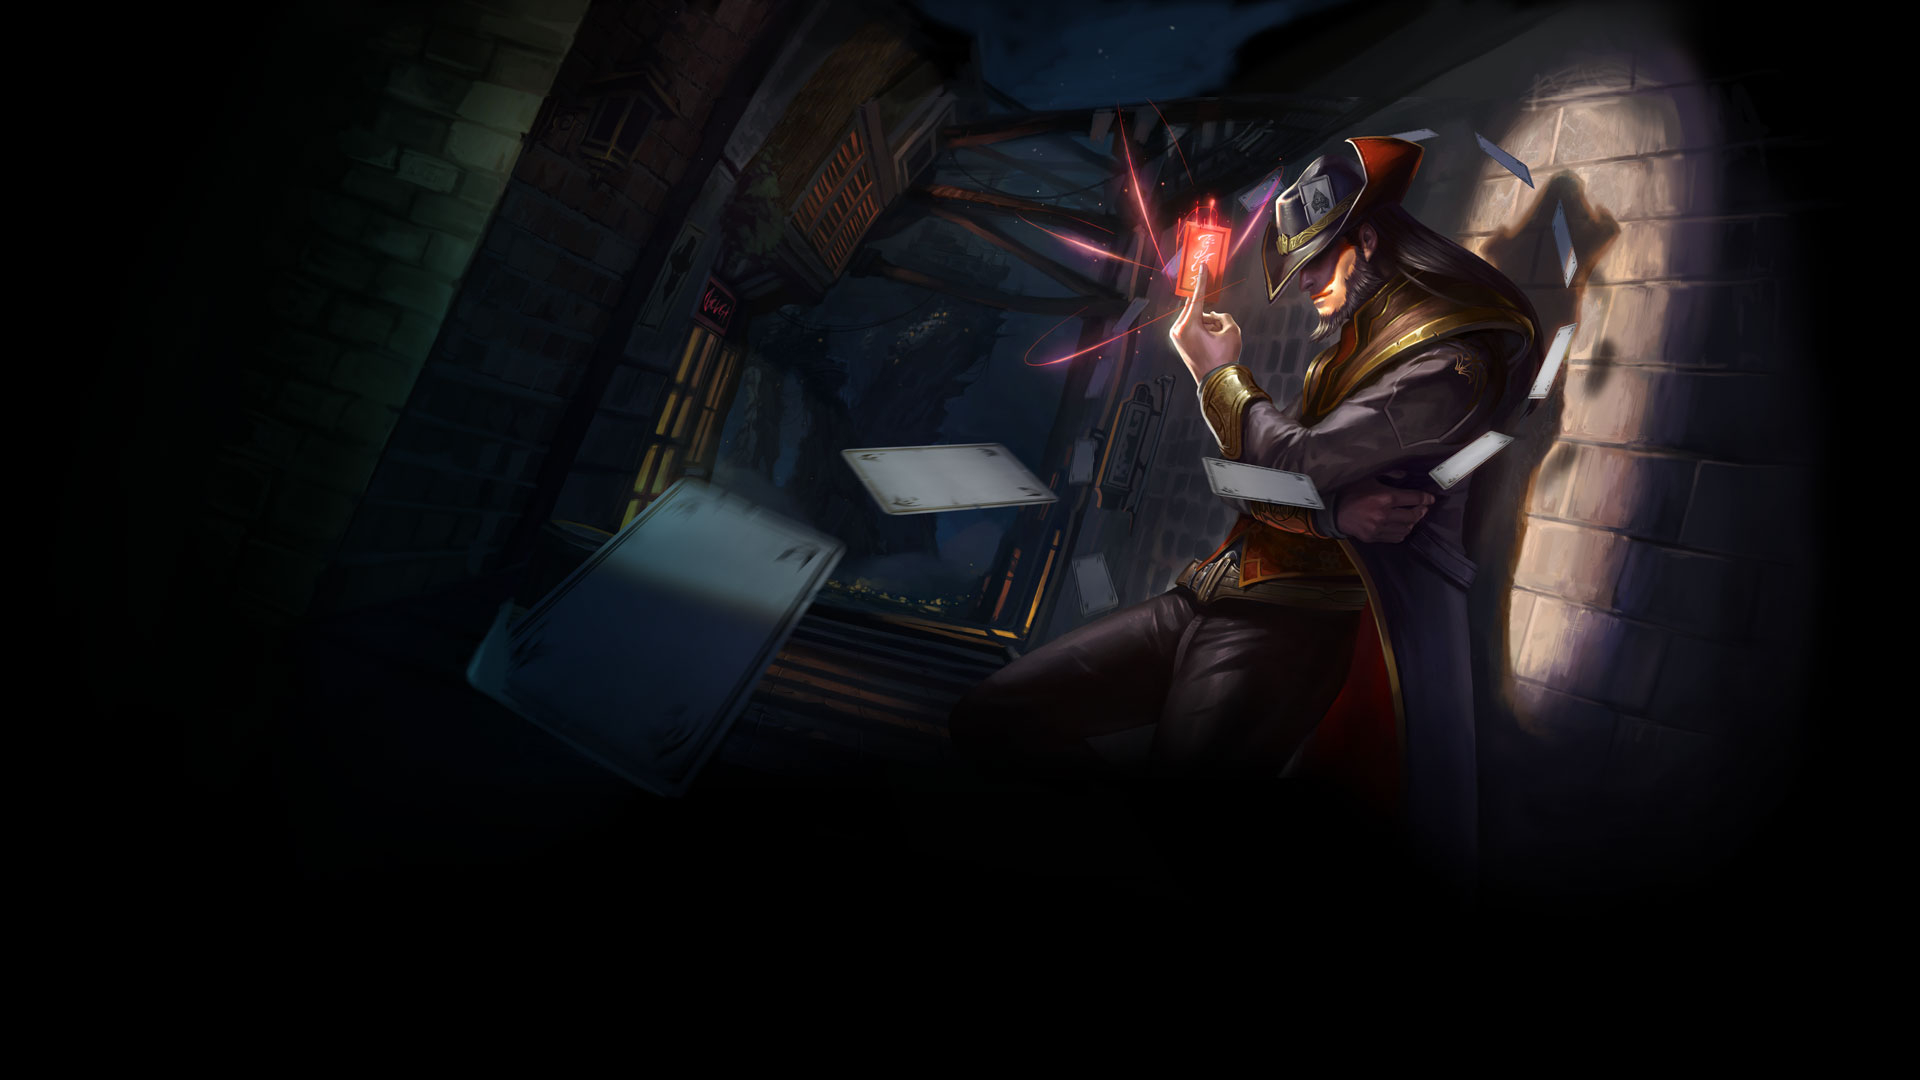 1920x1080 Twisted Fate &aring;&pound;&#129;&ccedil;&acute;&#153;&ccedil;&#148;&raquo;&aring;&#131;&#143; LOL wallpaper : LOL&aring;&pound;&#129;&ccedil;&acute;&#153; &ccedil;&#148;&raquo;&aring;&#131;&#143;&atilde;&#129;&frac34;&atilde;&#129;&uml;&atilde;&#130;&#129;&atilde;&#130;&micro;&atilde;&#130;&curren;&atilde;&#131;&#136